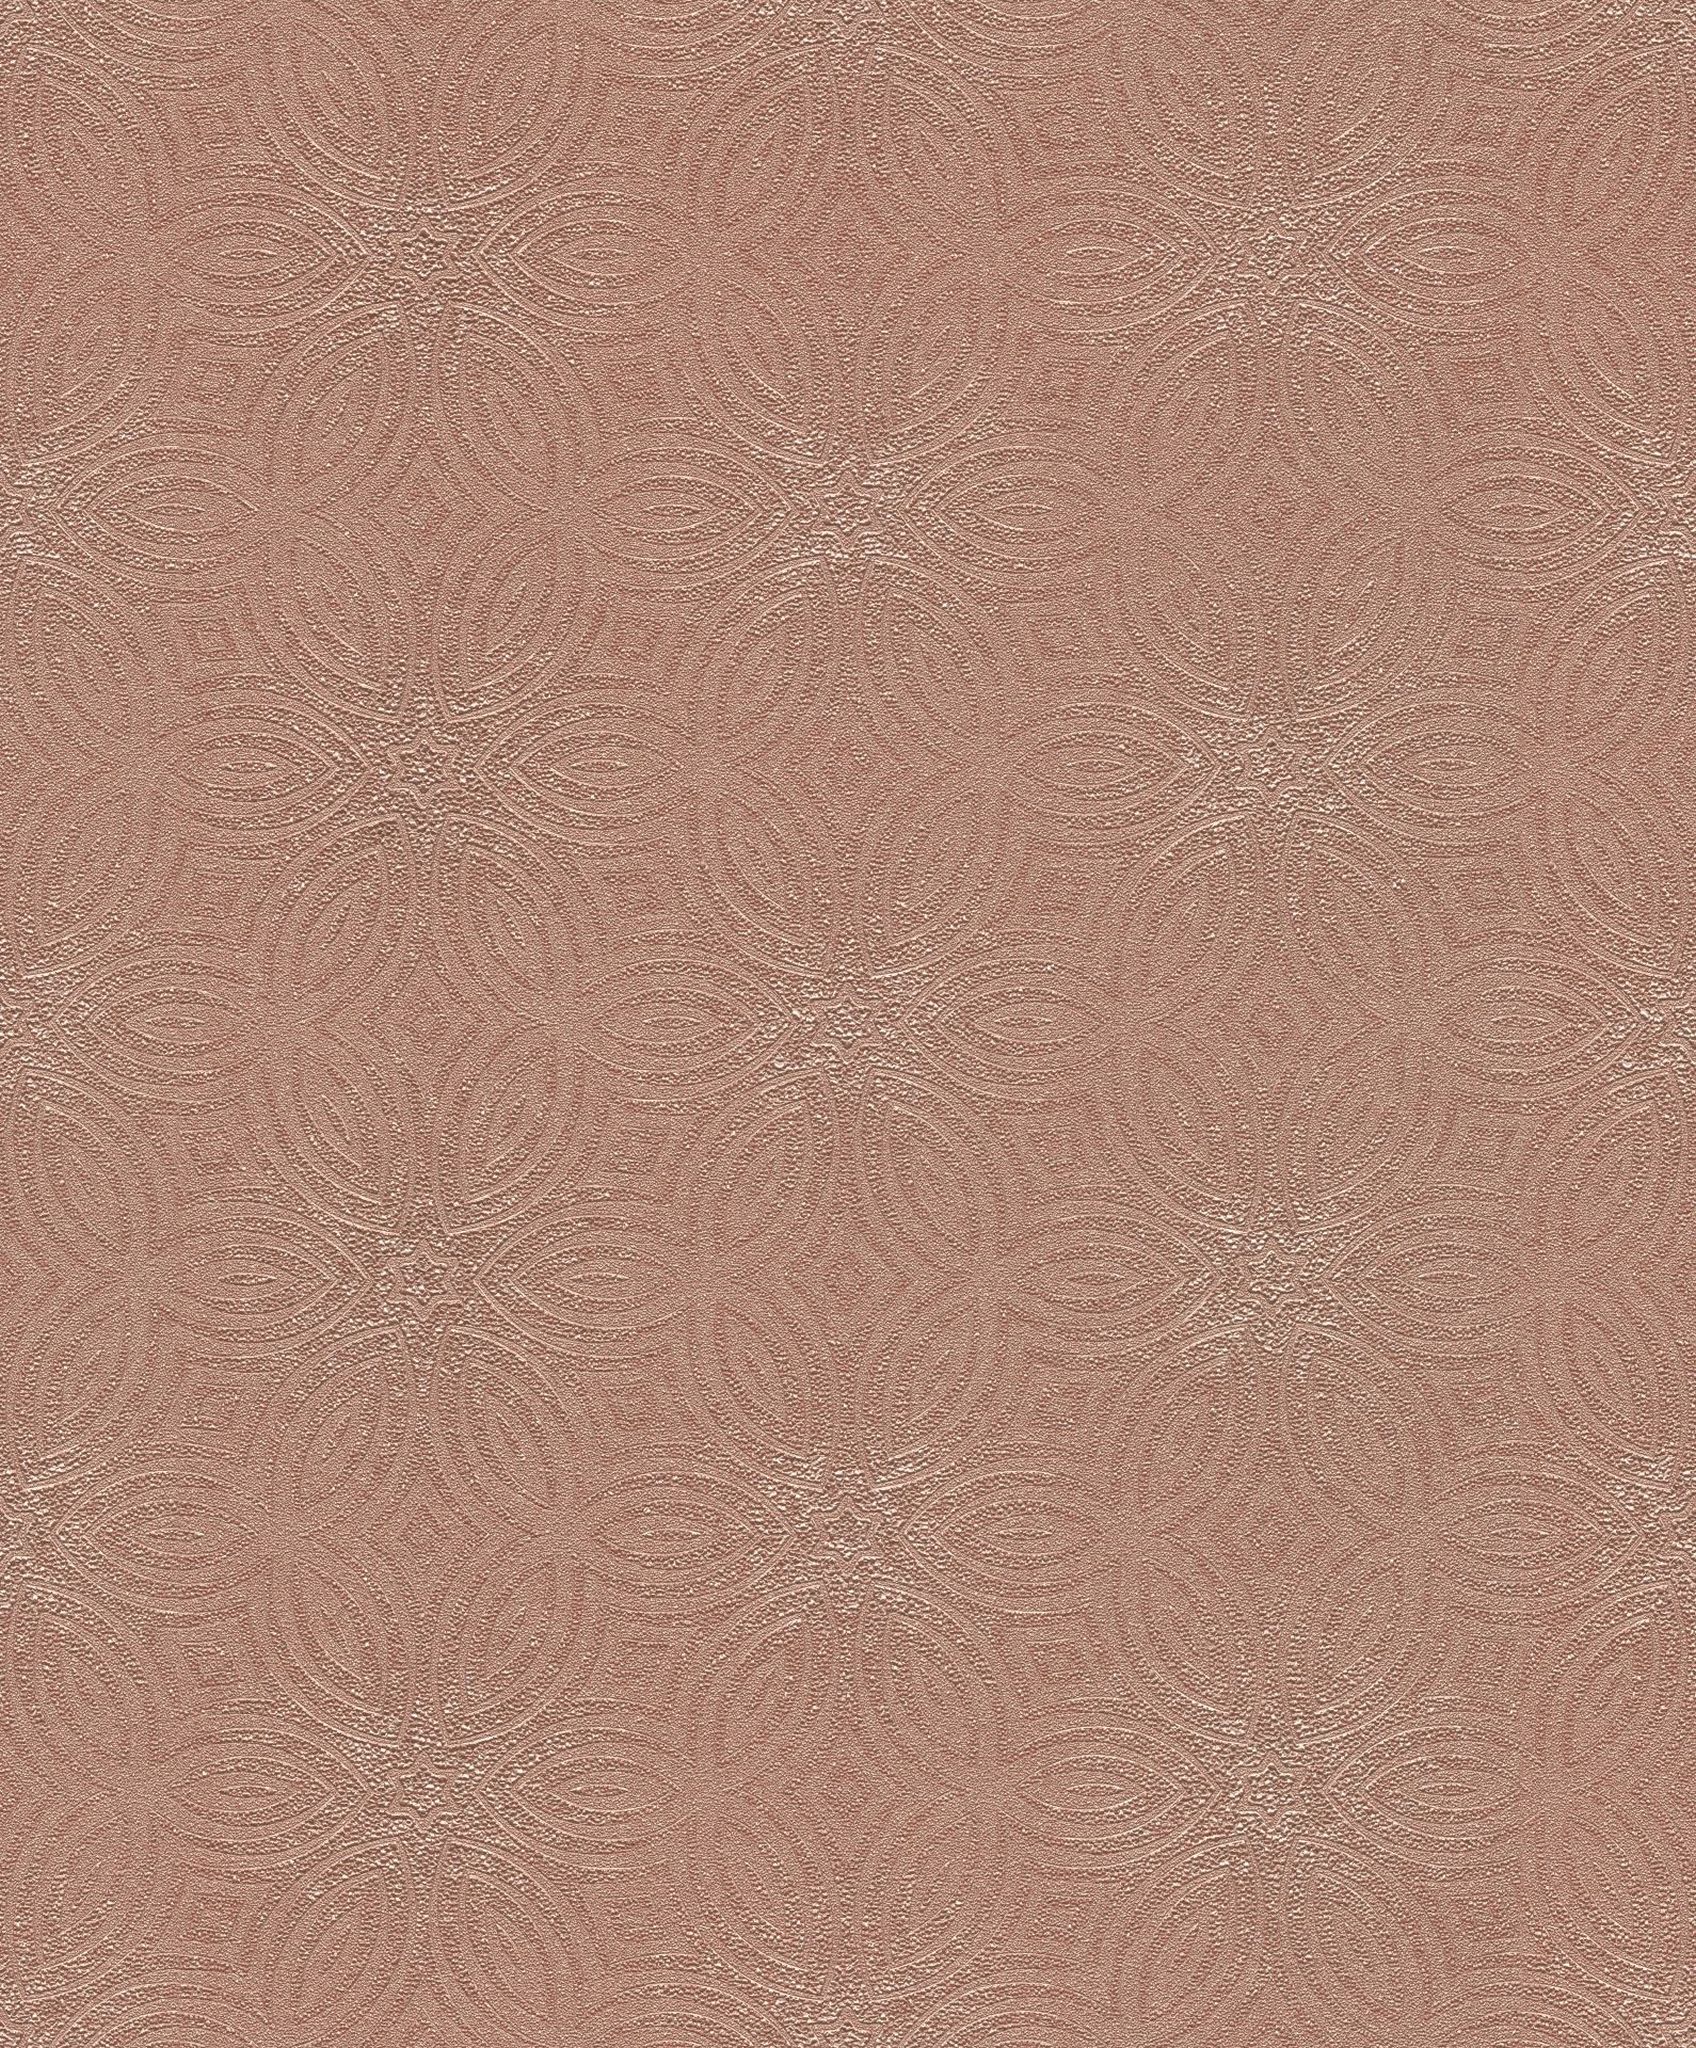 Rasch Selection, Floral, rot 530551